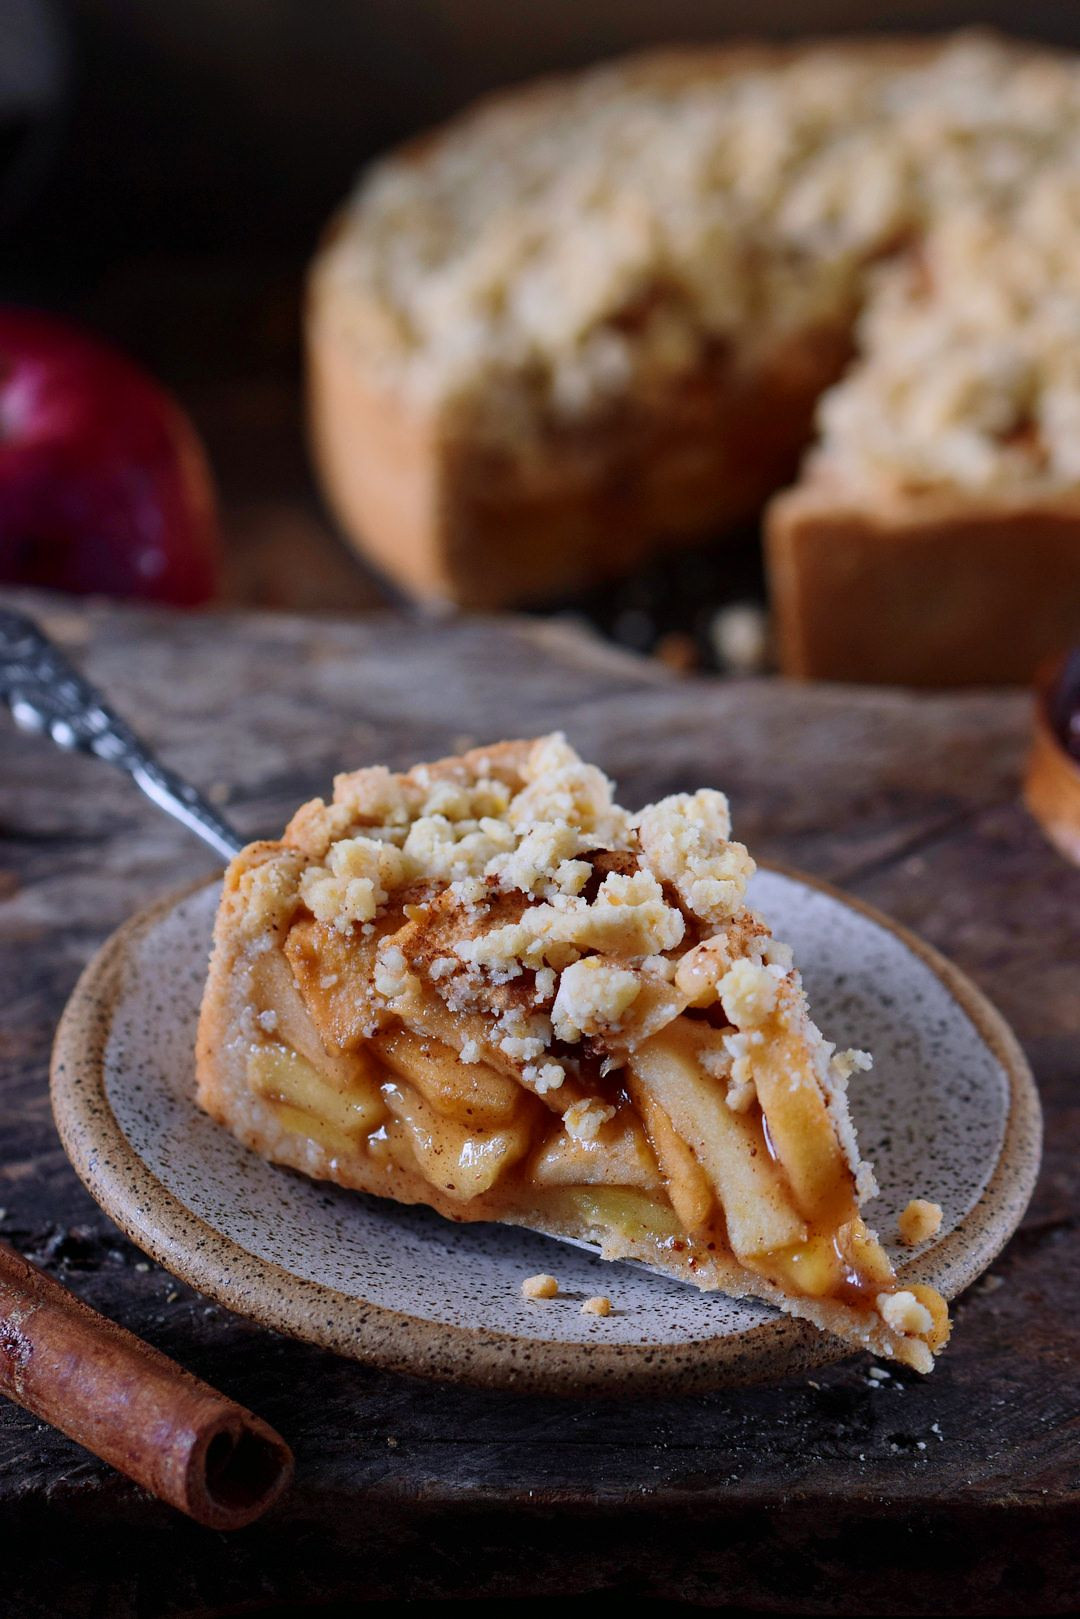 Easy Vegan Apple Pie
 This vegan apple pie with streusel is the perfect fall